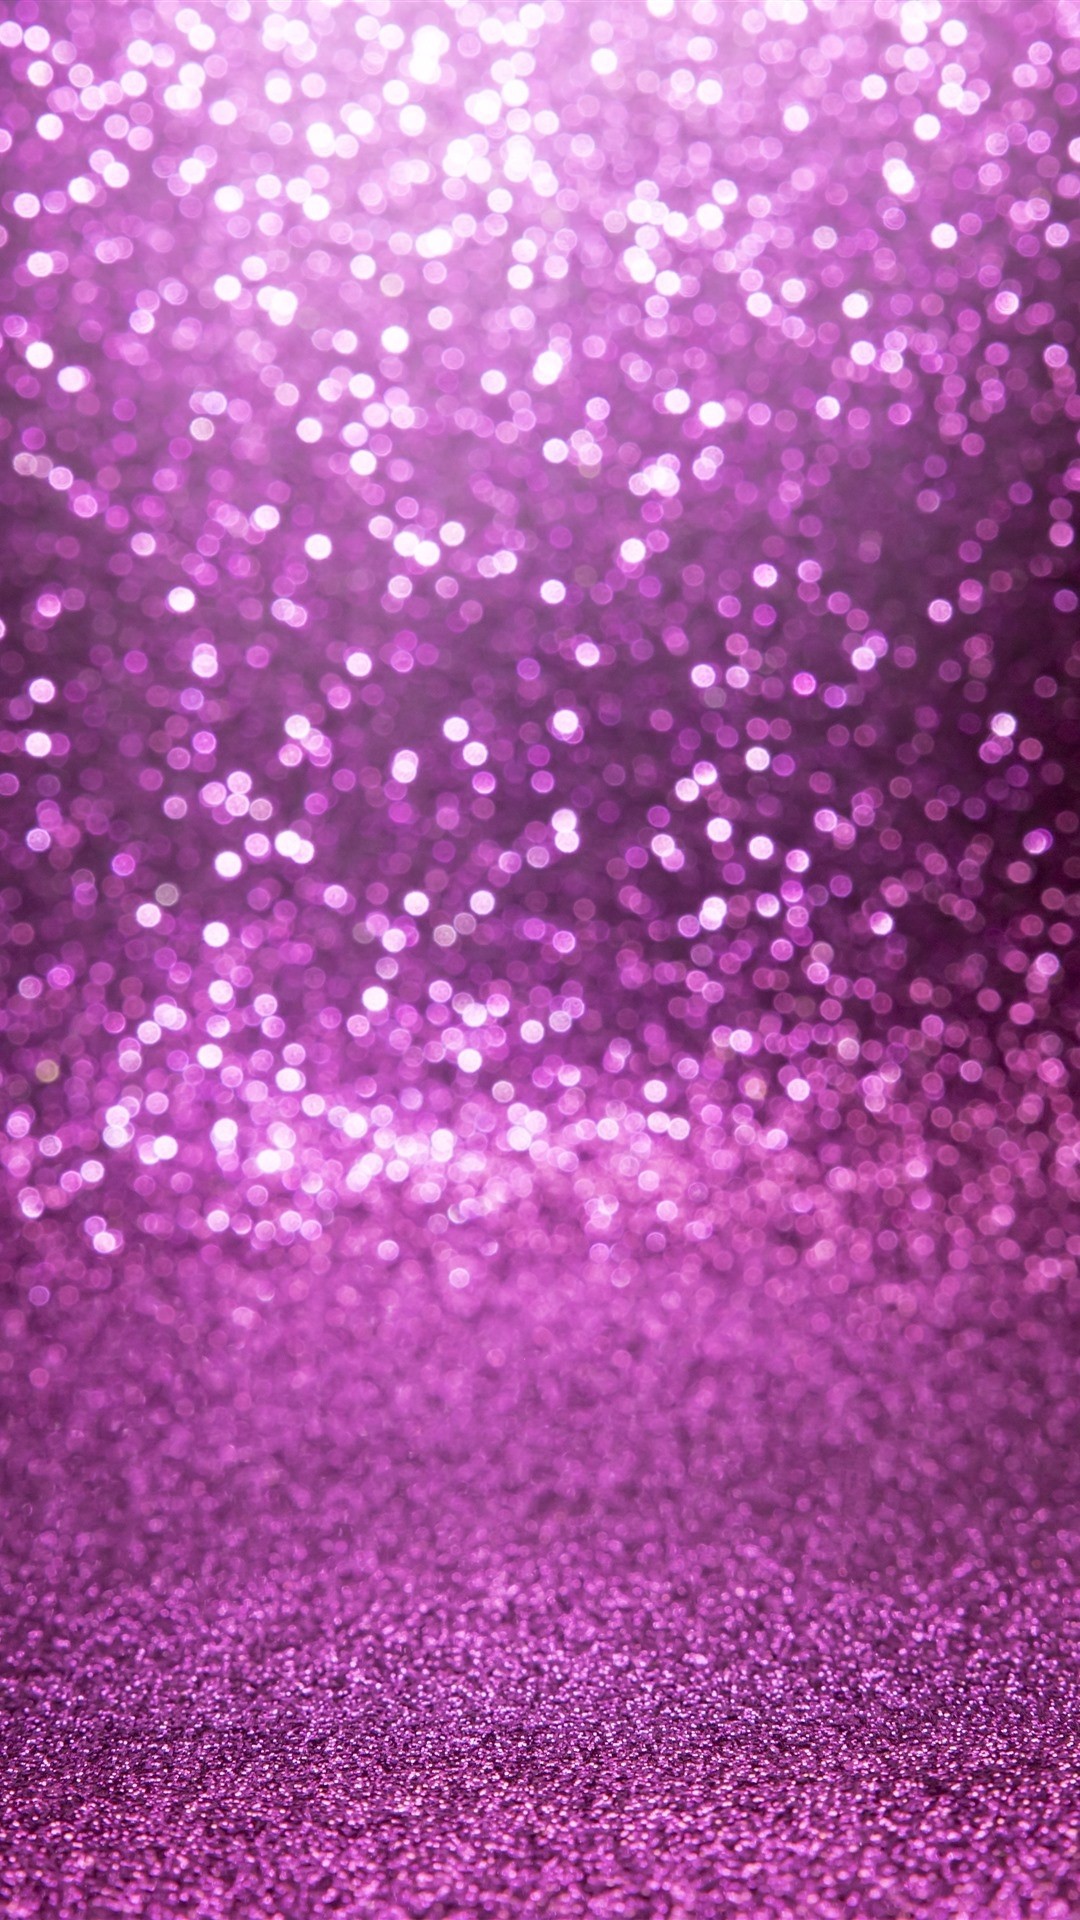 Sparkle iPhone hd wallpaper